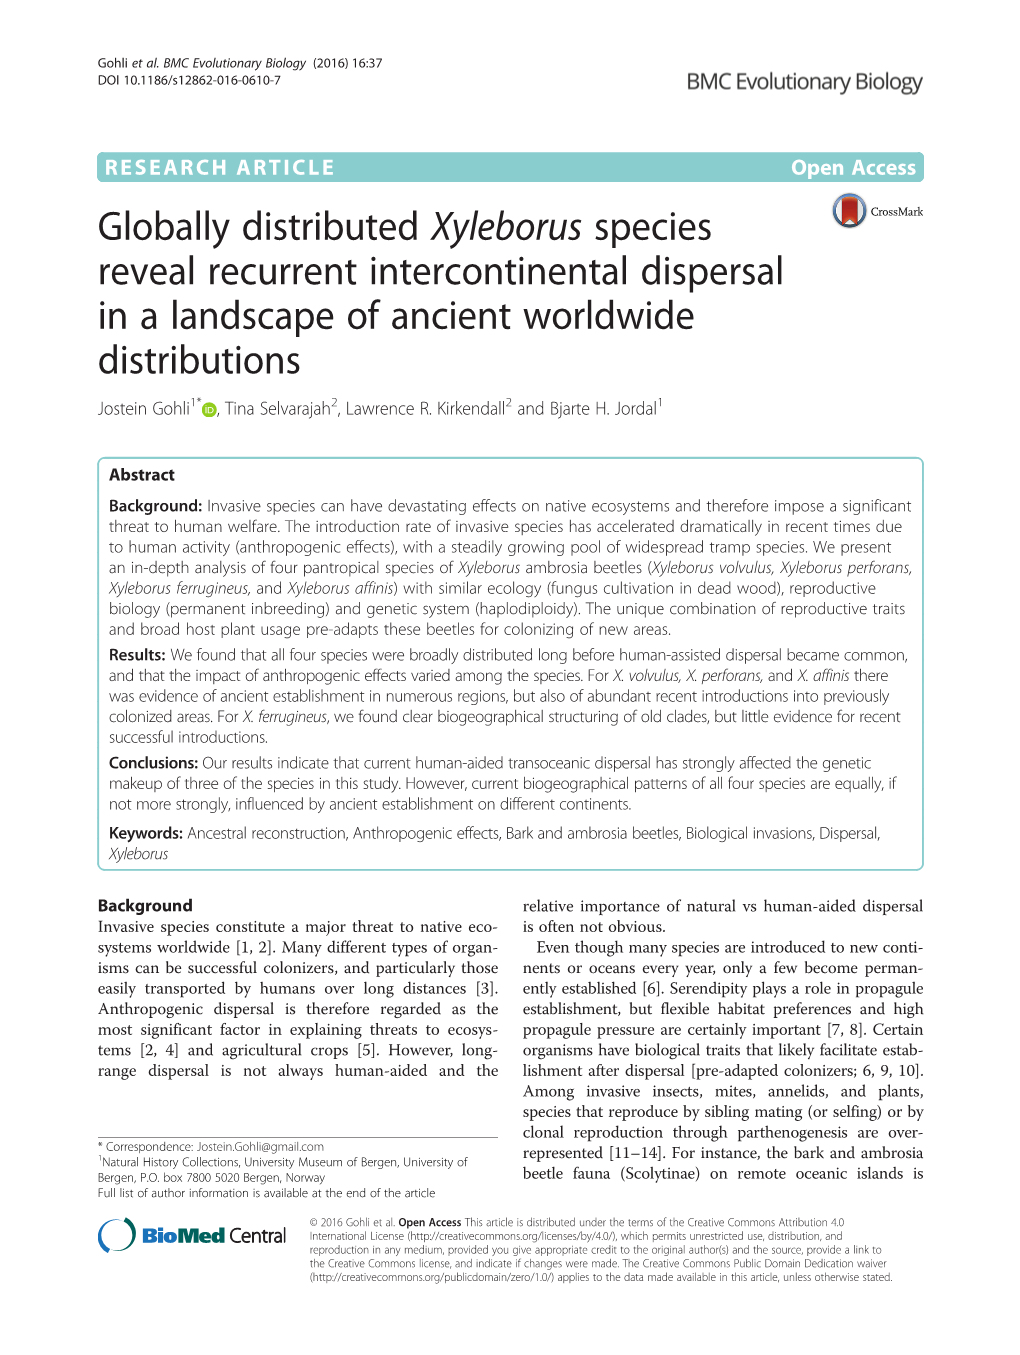 Globally Distributed Xyleborus Species Reveal Recurrent Intercontinental